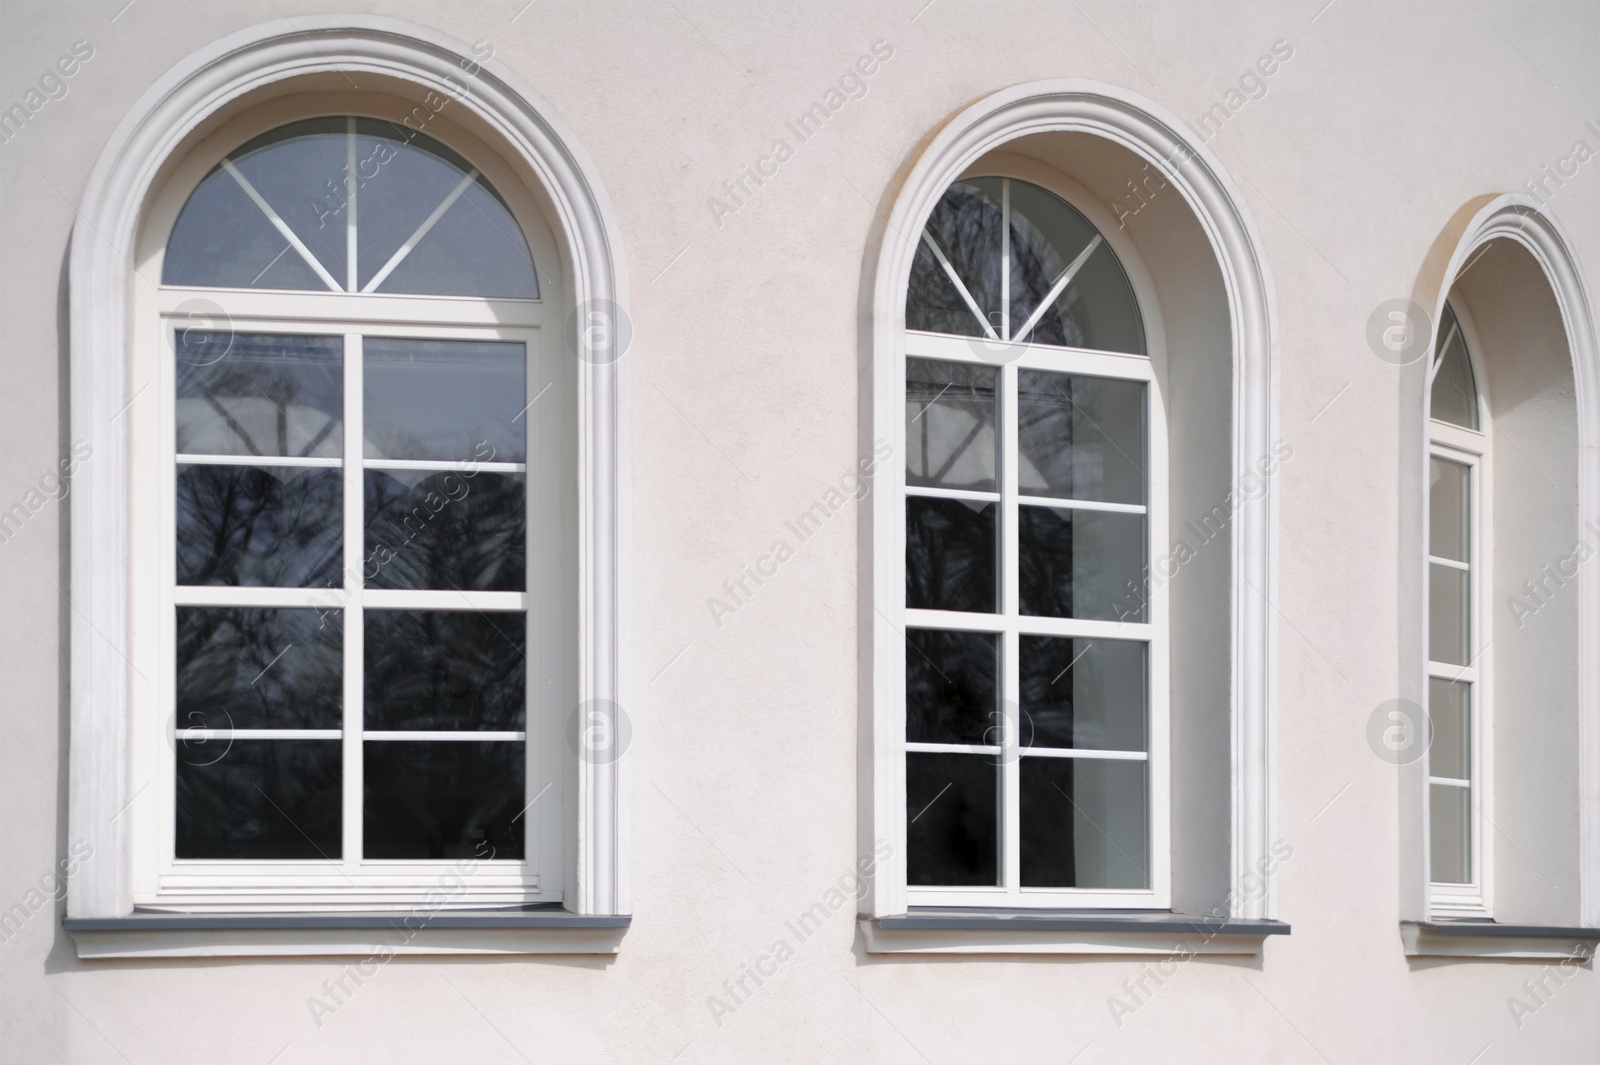 Photo of Beautiful arched windows in building, view from outdoors